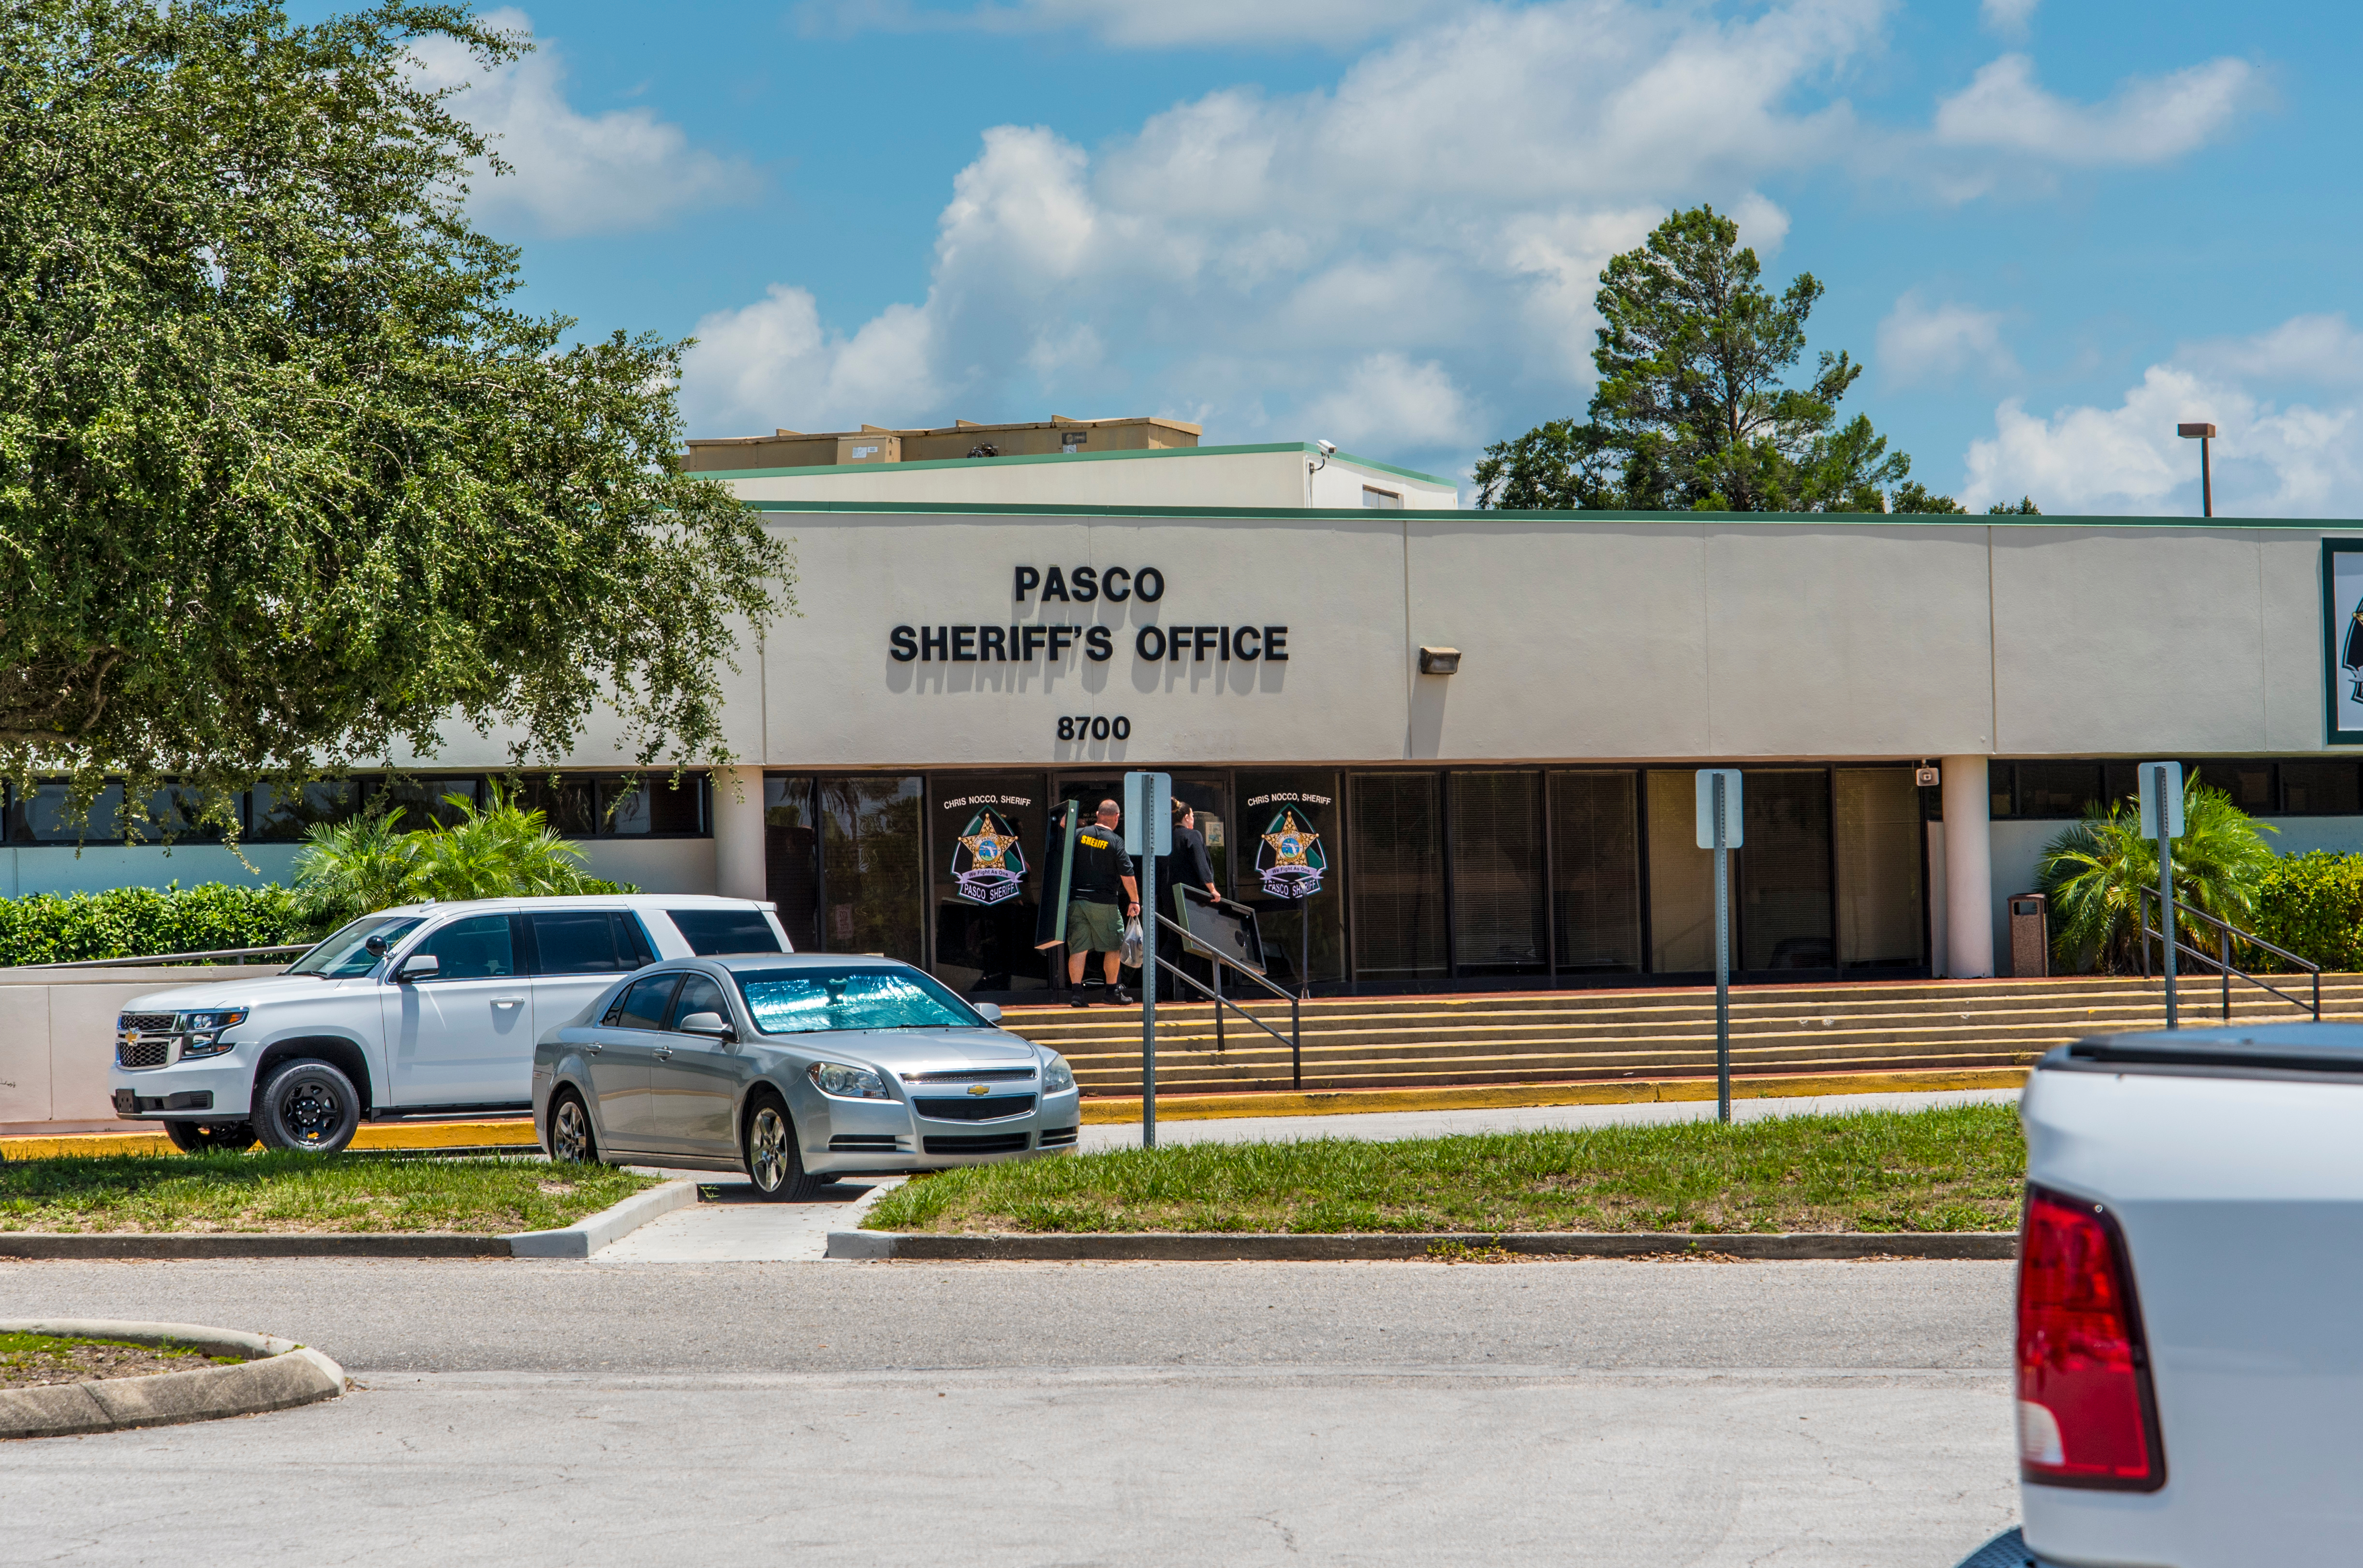 Pascoe County Sheriff's Office (Photointoto/Shutterstock)